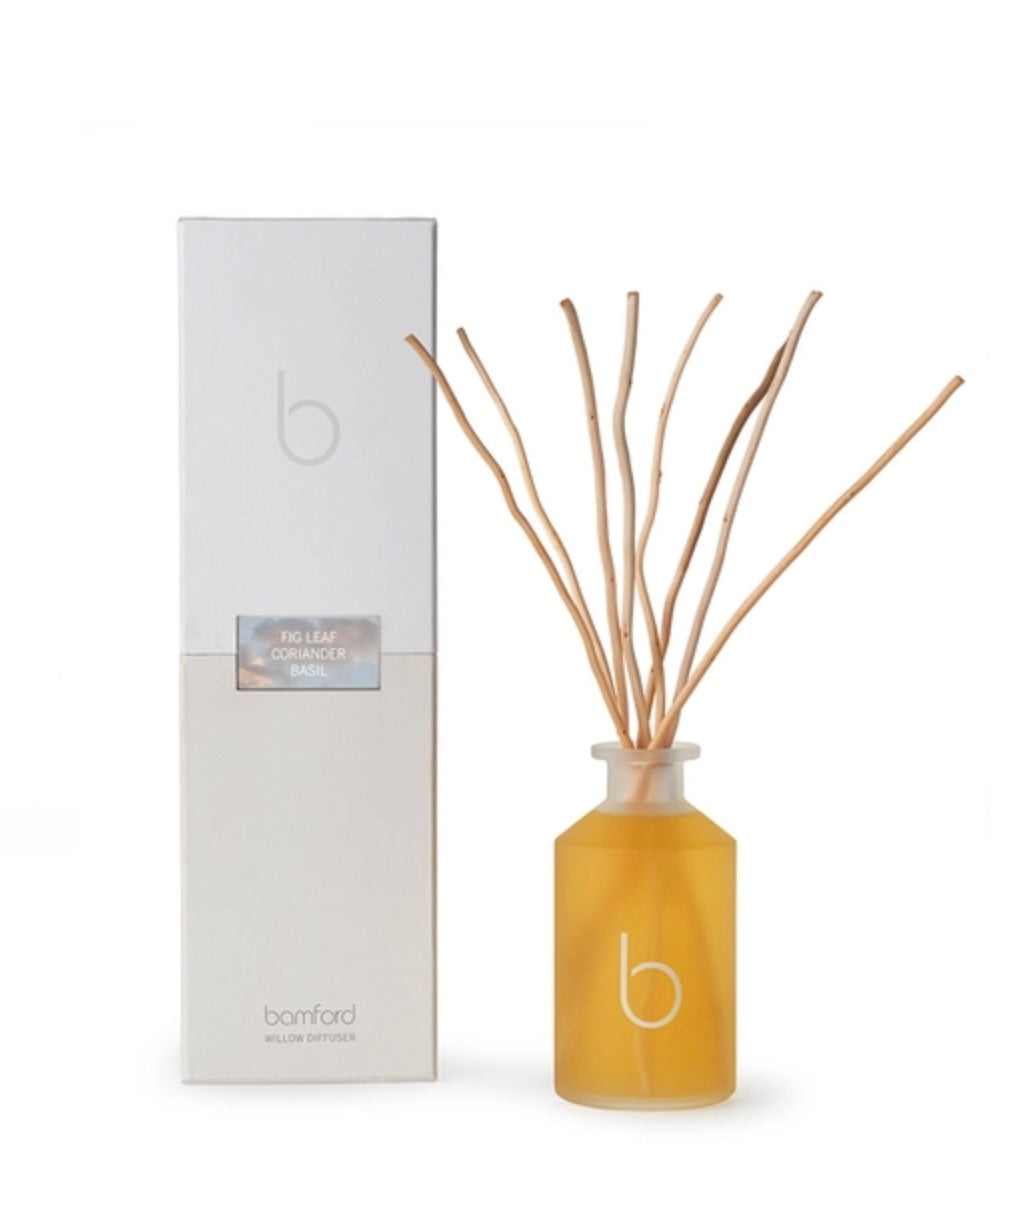 FIG LEAF WILLOW DIFFUSER